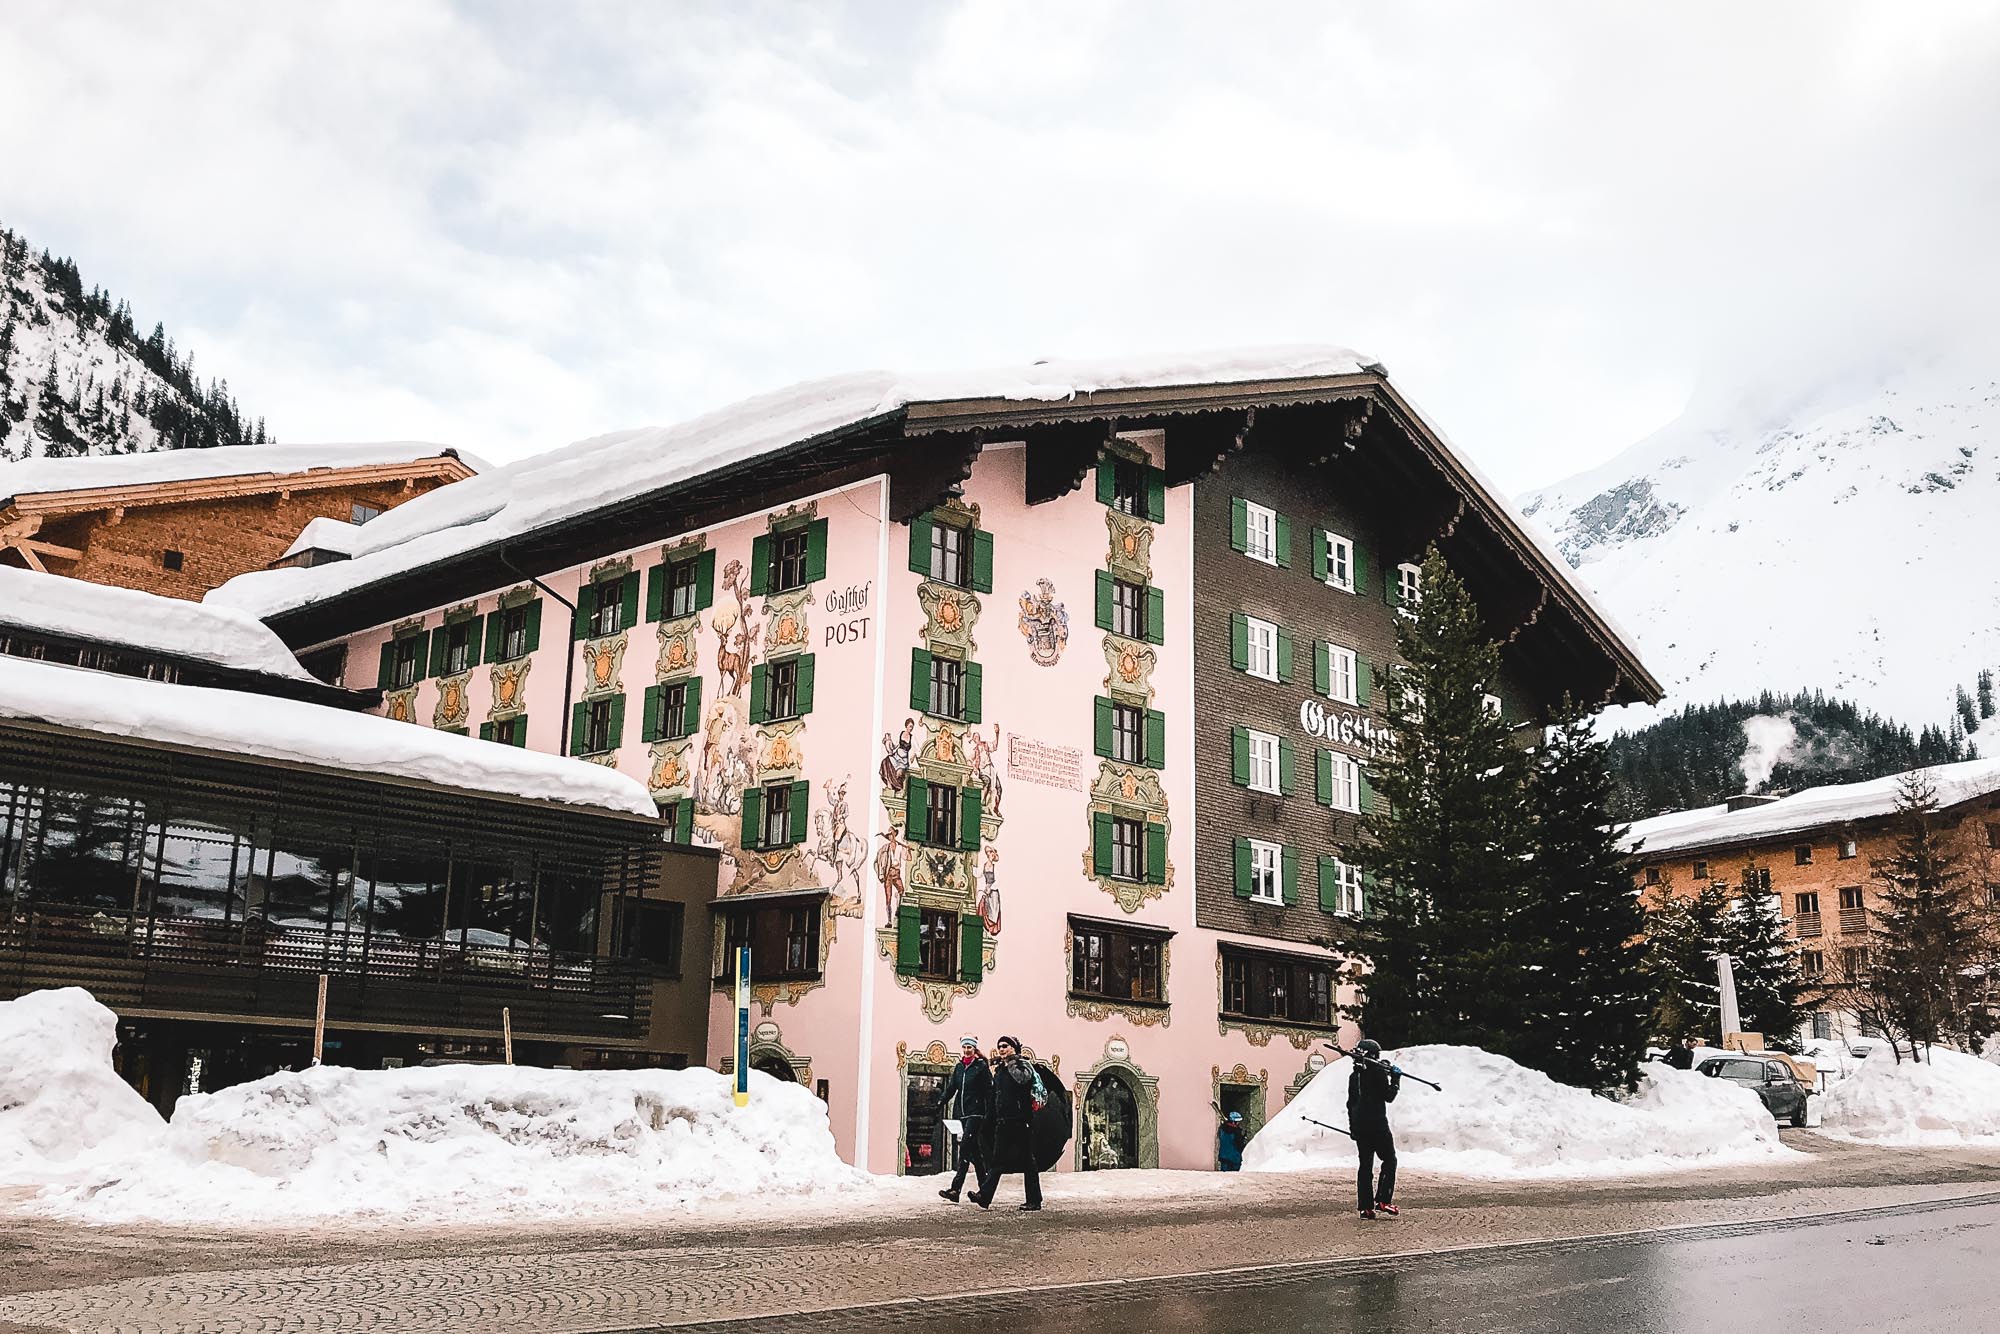 Hotel Guesthouse Post in downtown Lech Austria Ski Town